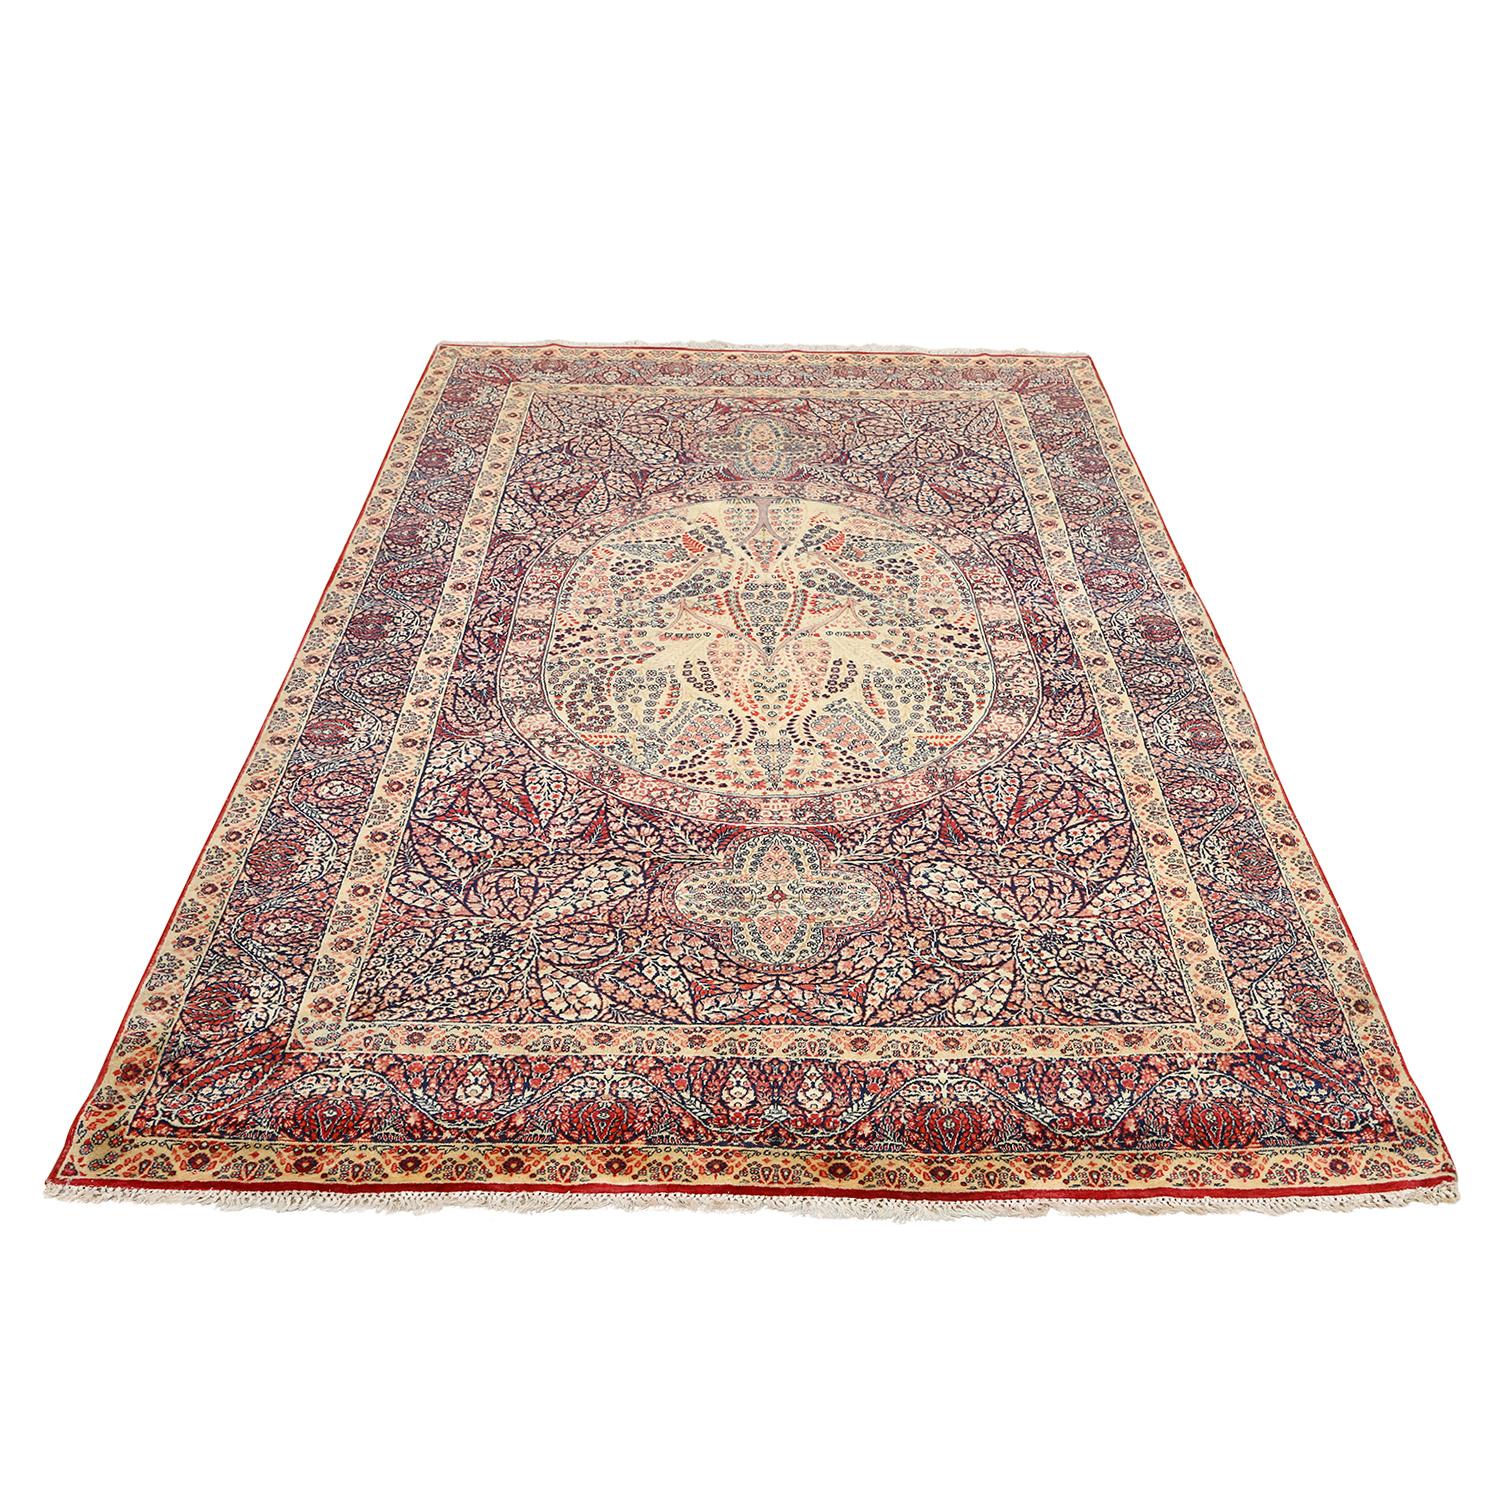 This Antique Lavar Rug adorned with a Center Medallion Floral Design is a captivating embodiment of timeless beauty and meticulous craftsmanship. Originating from the celebrated weaving region of Lavar in Persia, these rugs are much more than floor